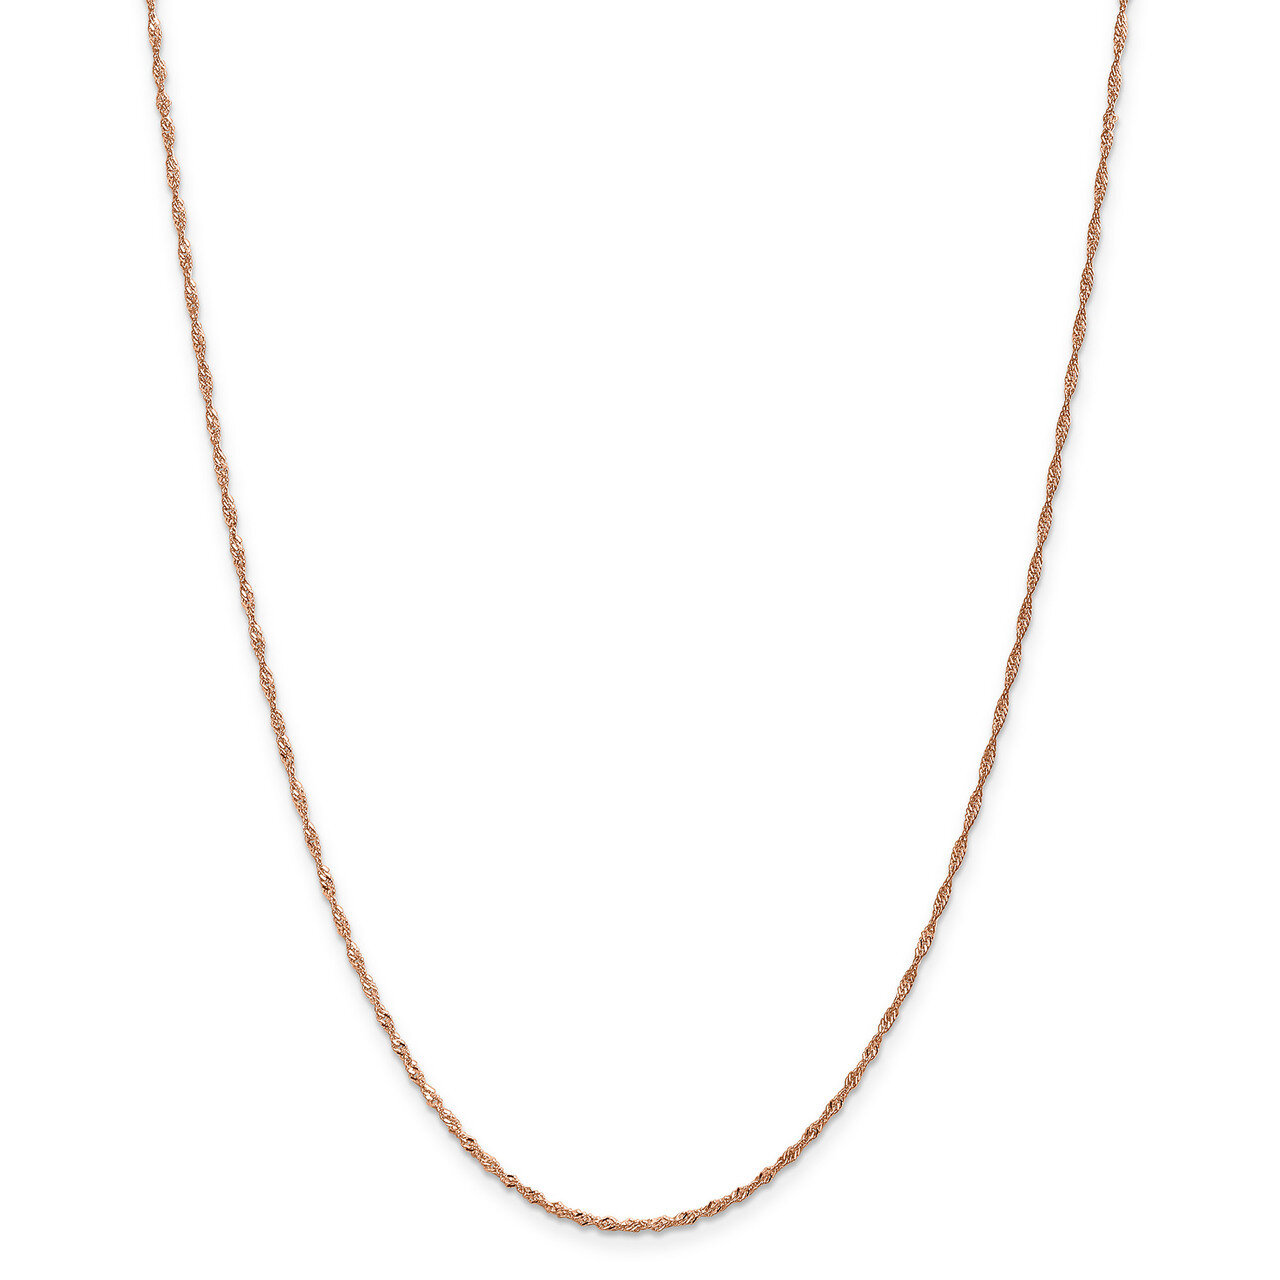 1 mm Singapore Chain 16 Inch 14k Rose Gold HB-7164-16